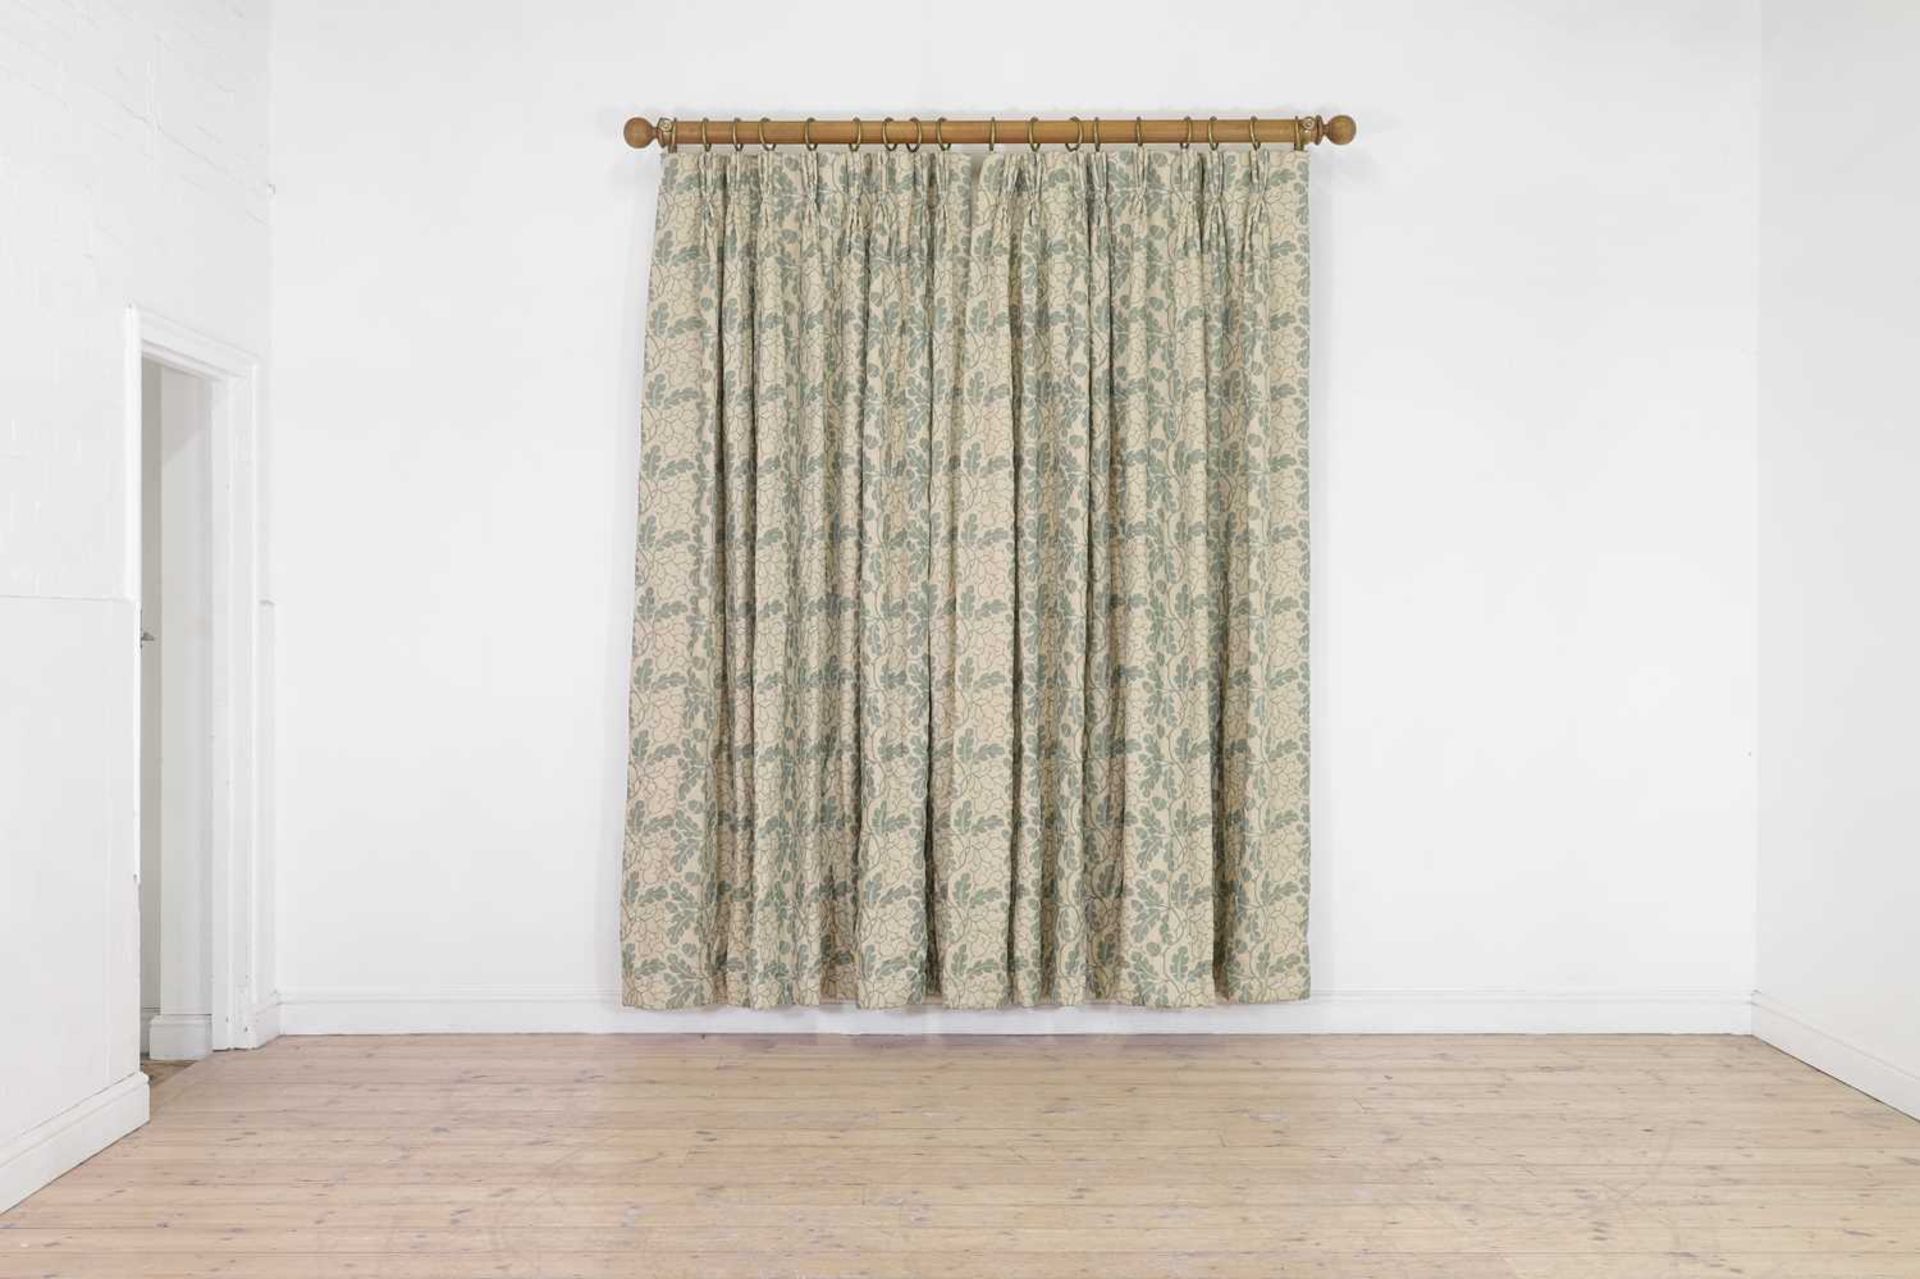 Two pairs of 'Oak Leaves' curtains by Robert Kime, - Image 5 of 14